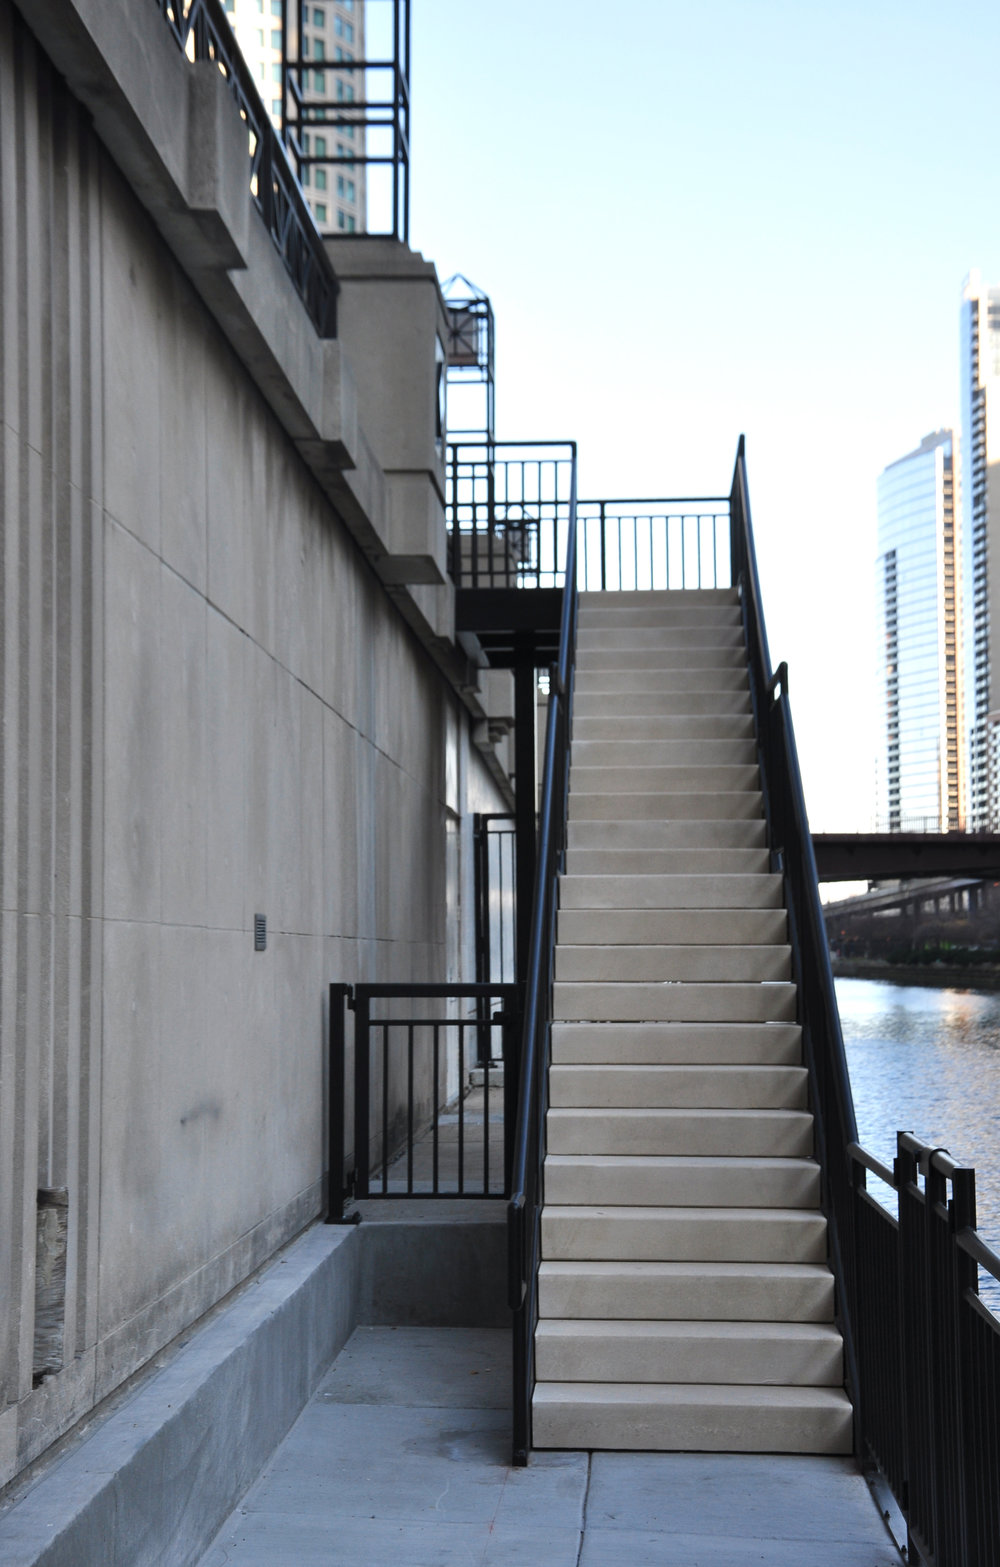 Project completed: new stairs at Michigan Avenue and the Chicago River